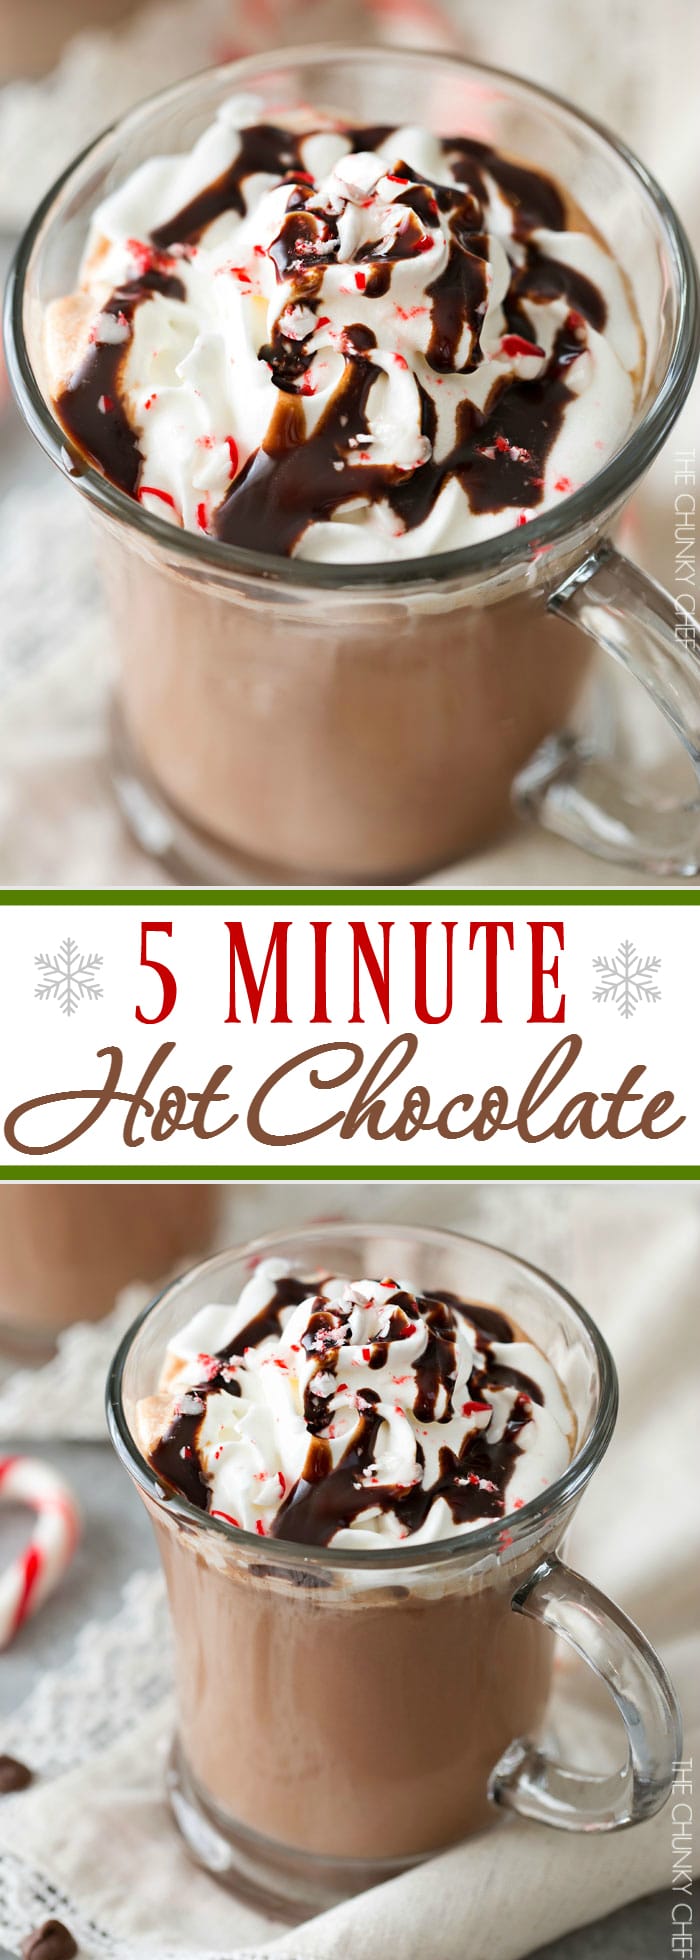 5 Minute Hot Chocolate | Thick, creamy, homemade hot chocolate, made easily in just 5 minutes! Add a bit of peppermint extract for a kiss of festive peppermint flavor! | http://thechunkychef.com